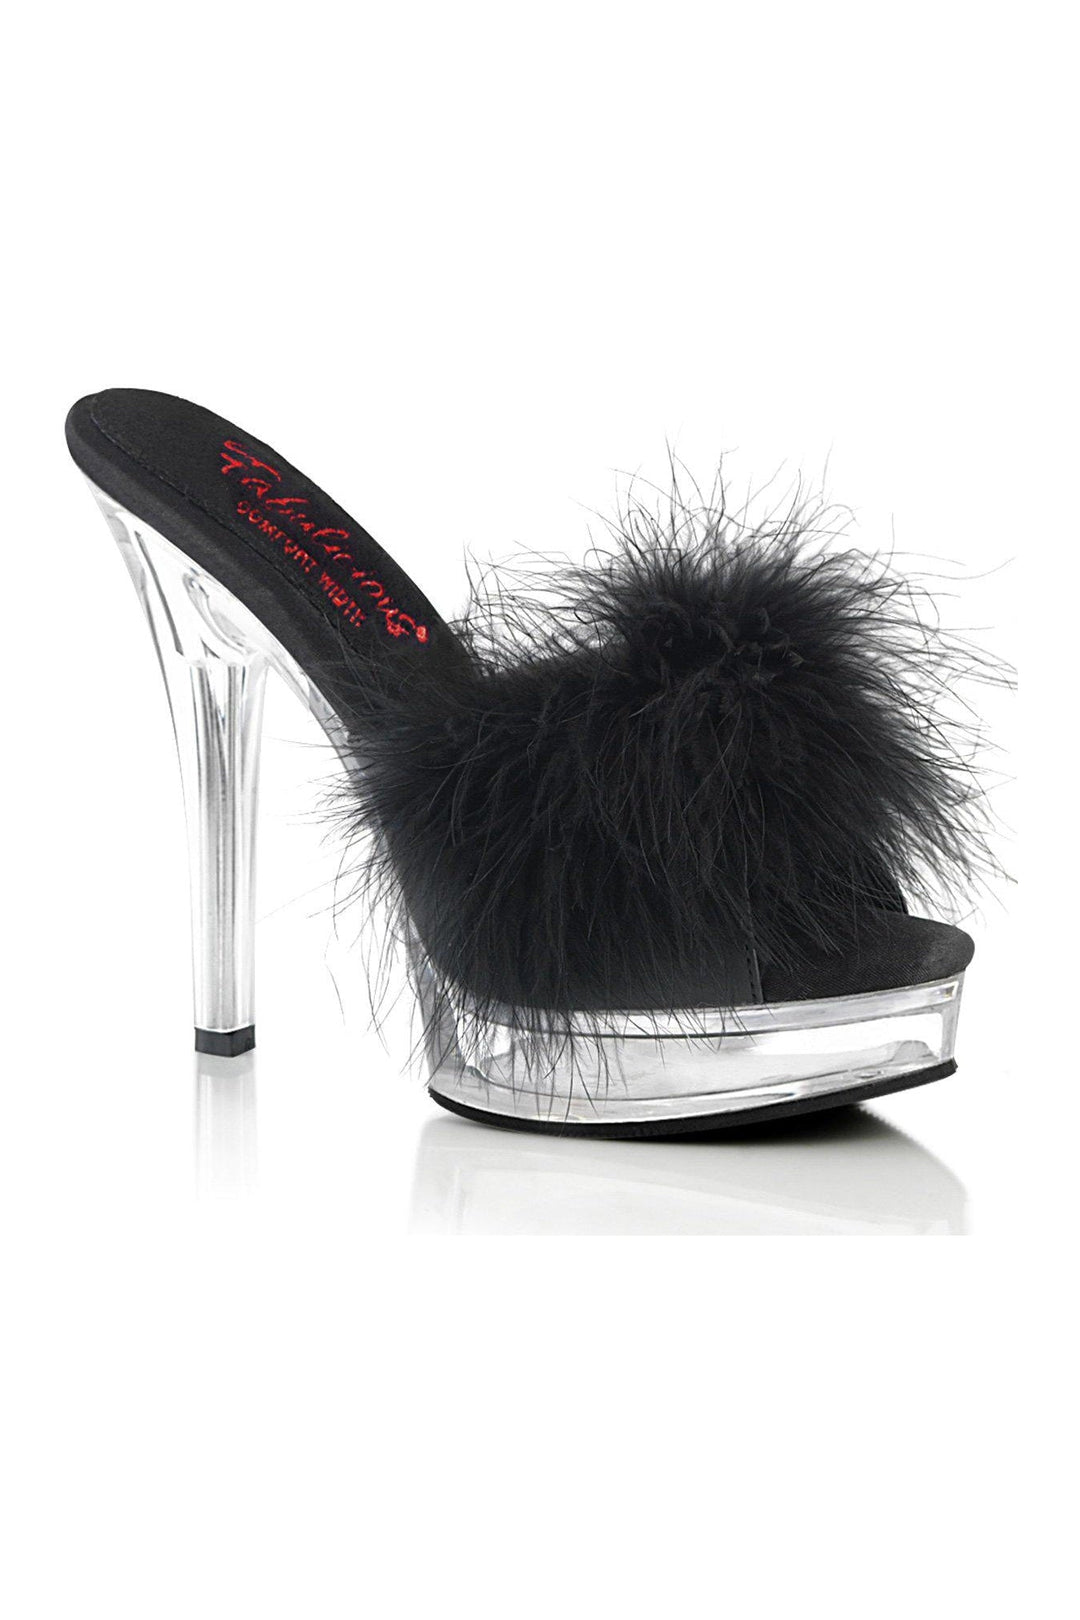 MAJESTY-501F-8 Slide | Black Faux Leather-Slides-Fabulicious-Black-6-Faux Leather-SEXYSHOES.COM